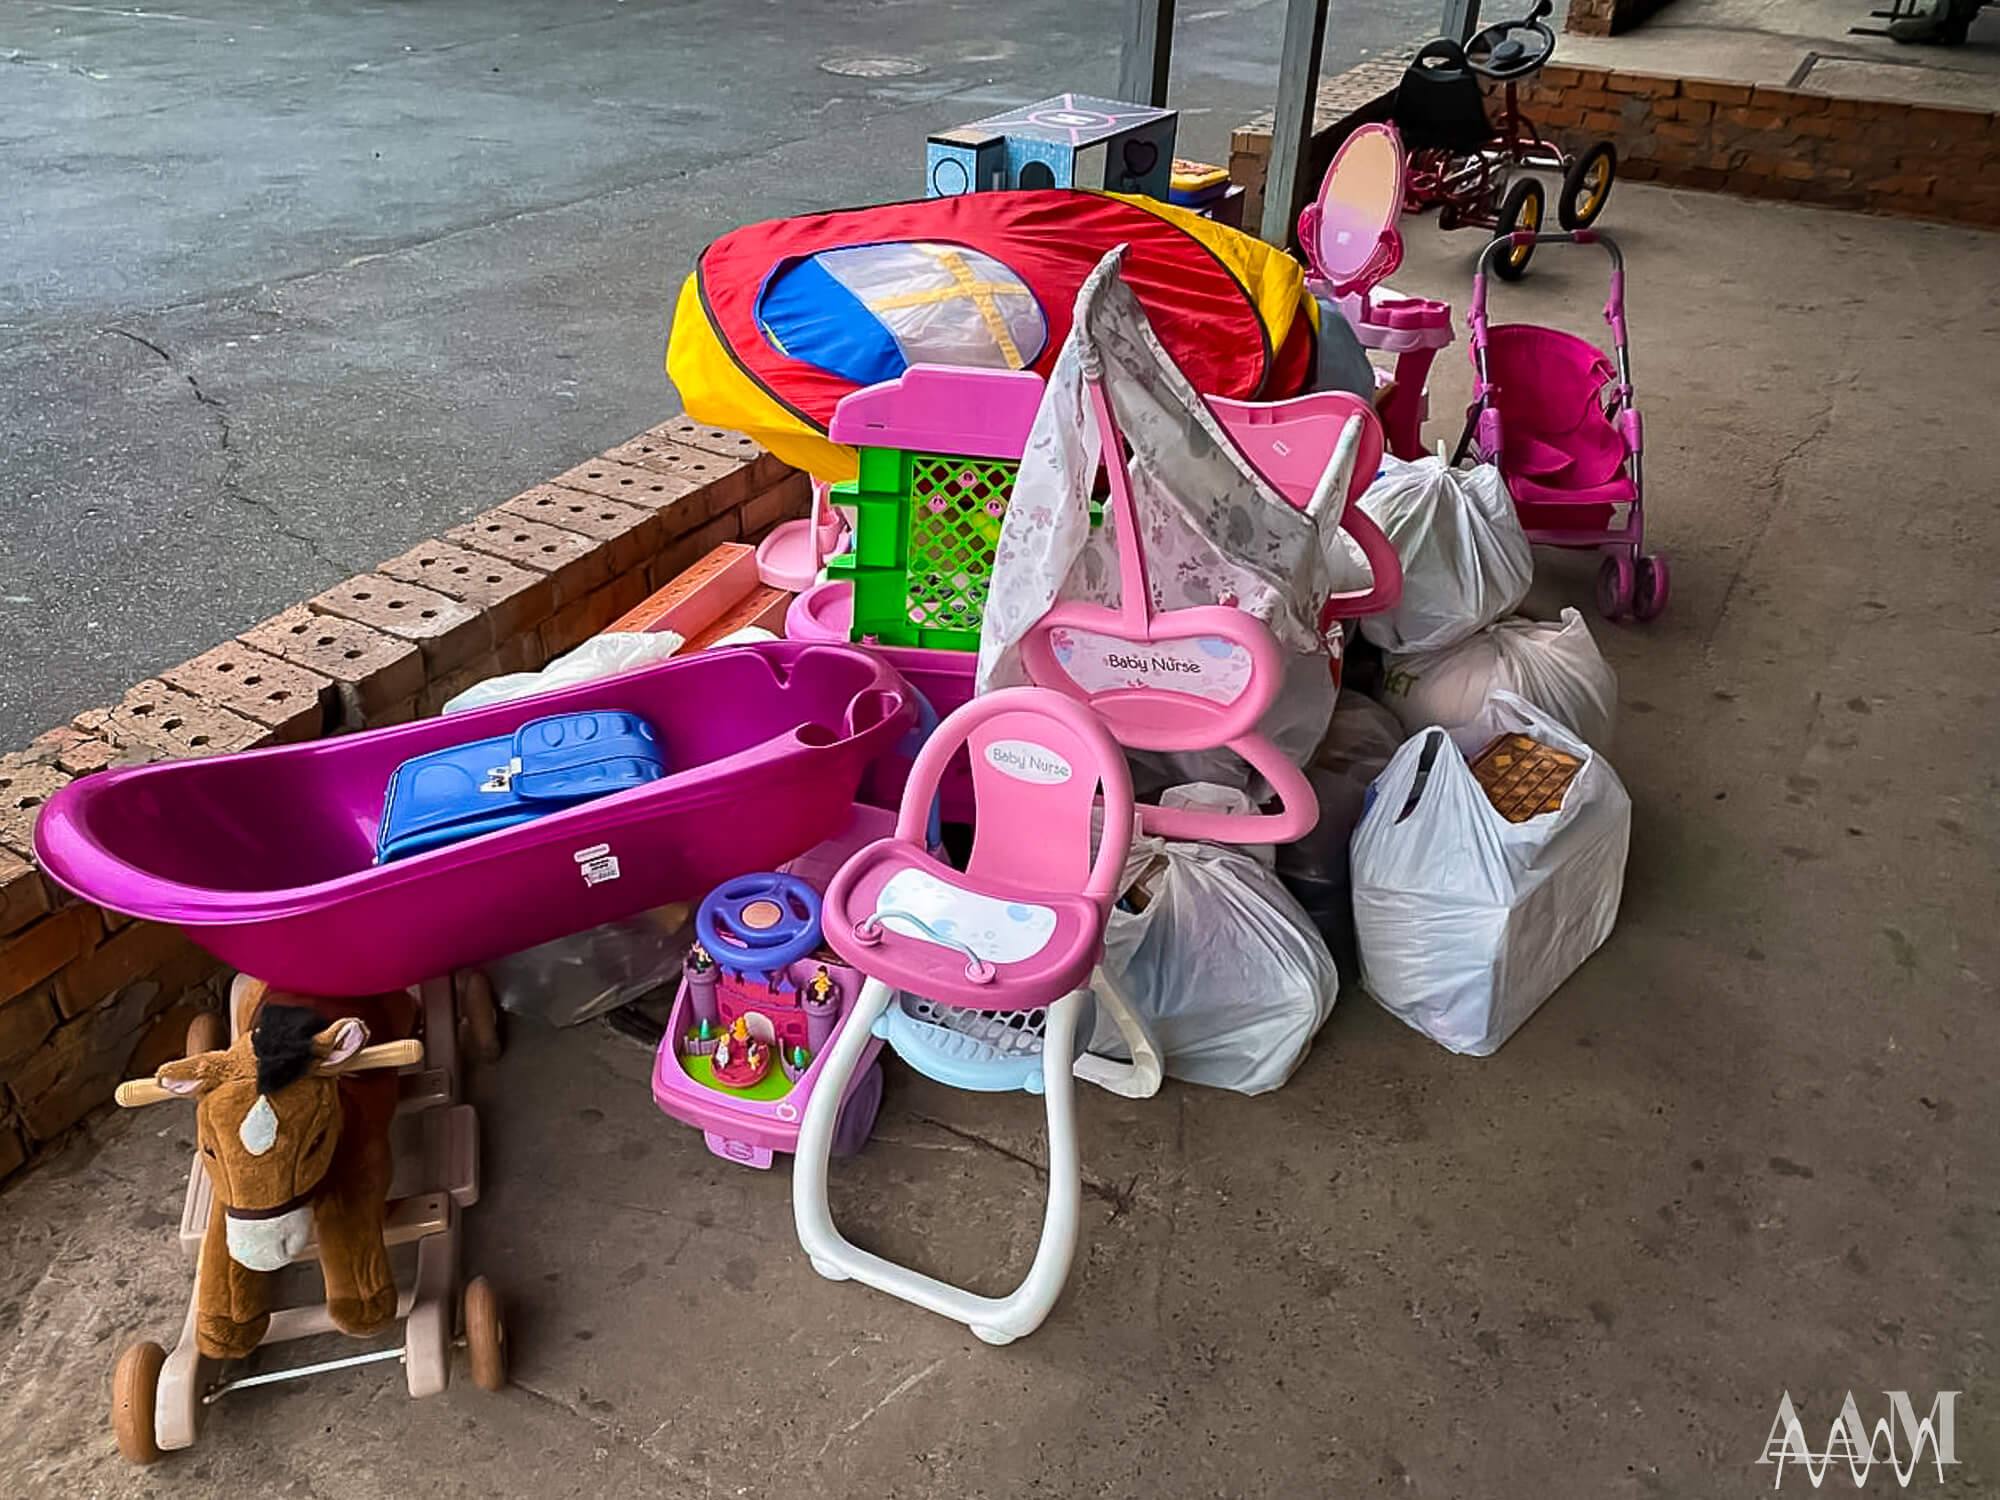 AAM HAS RECEIVED GRAND AID FROM “MEAT INDUSTRY” AND “MED”: CHILDREN’S TOYS, HOUSEHOLD EQUIPMENT – THANK YOU!